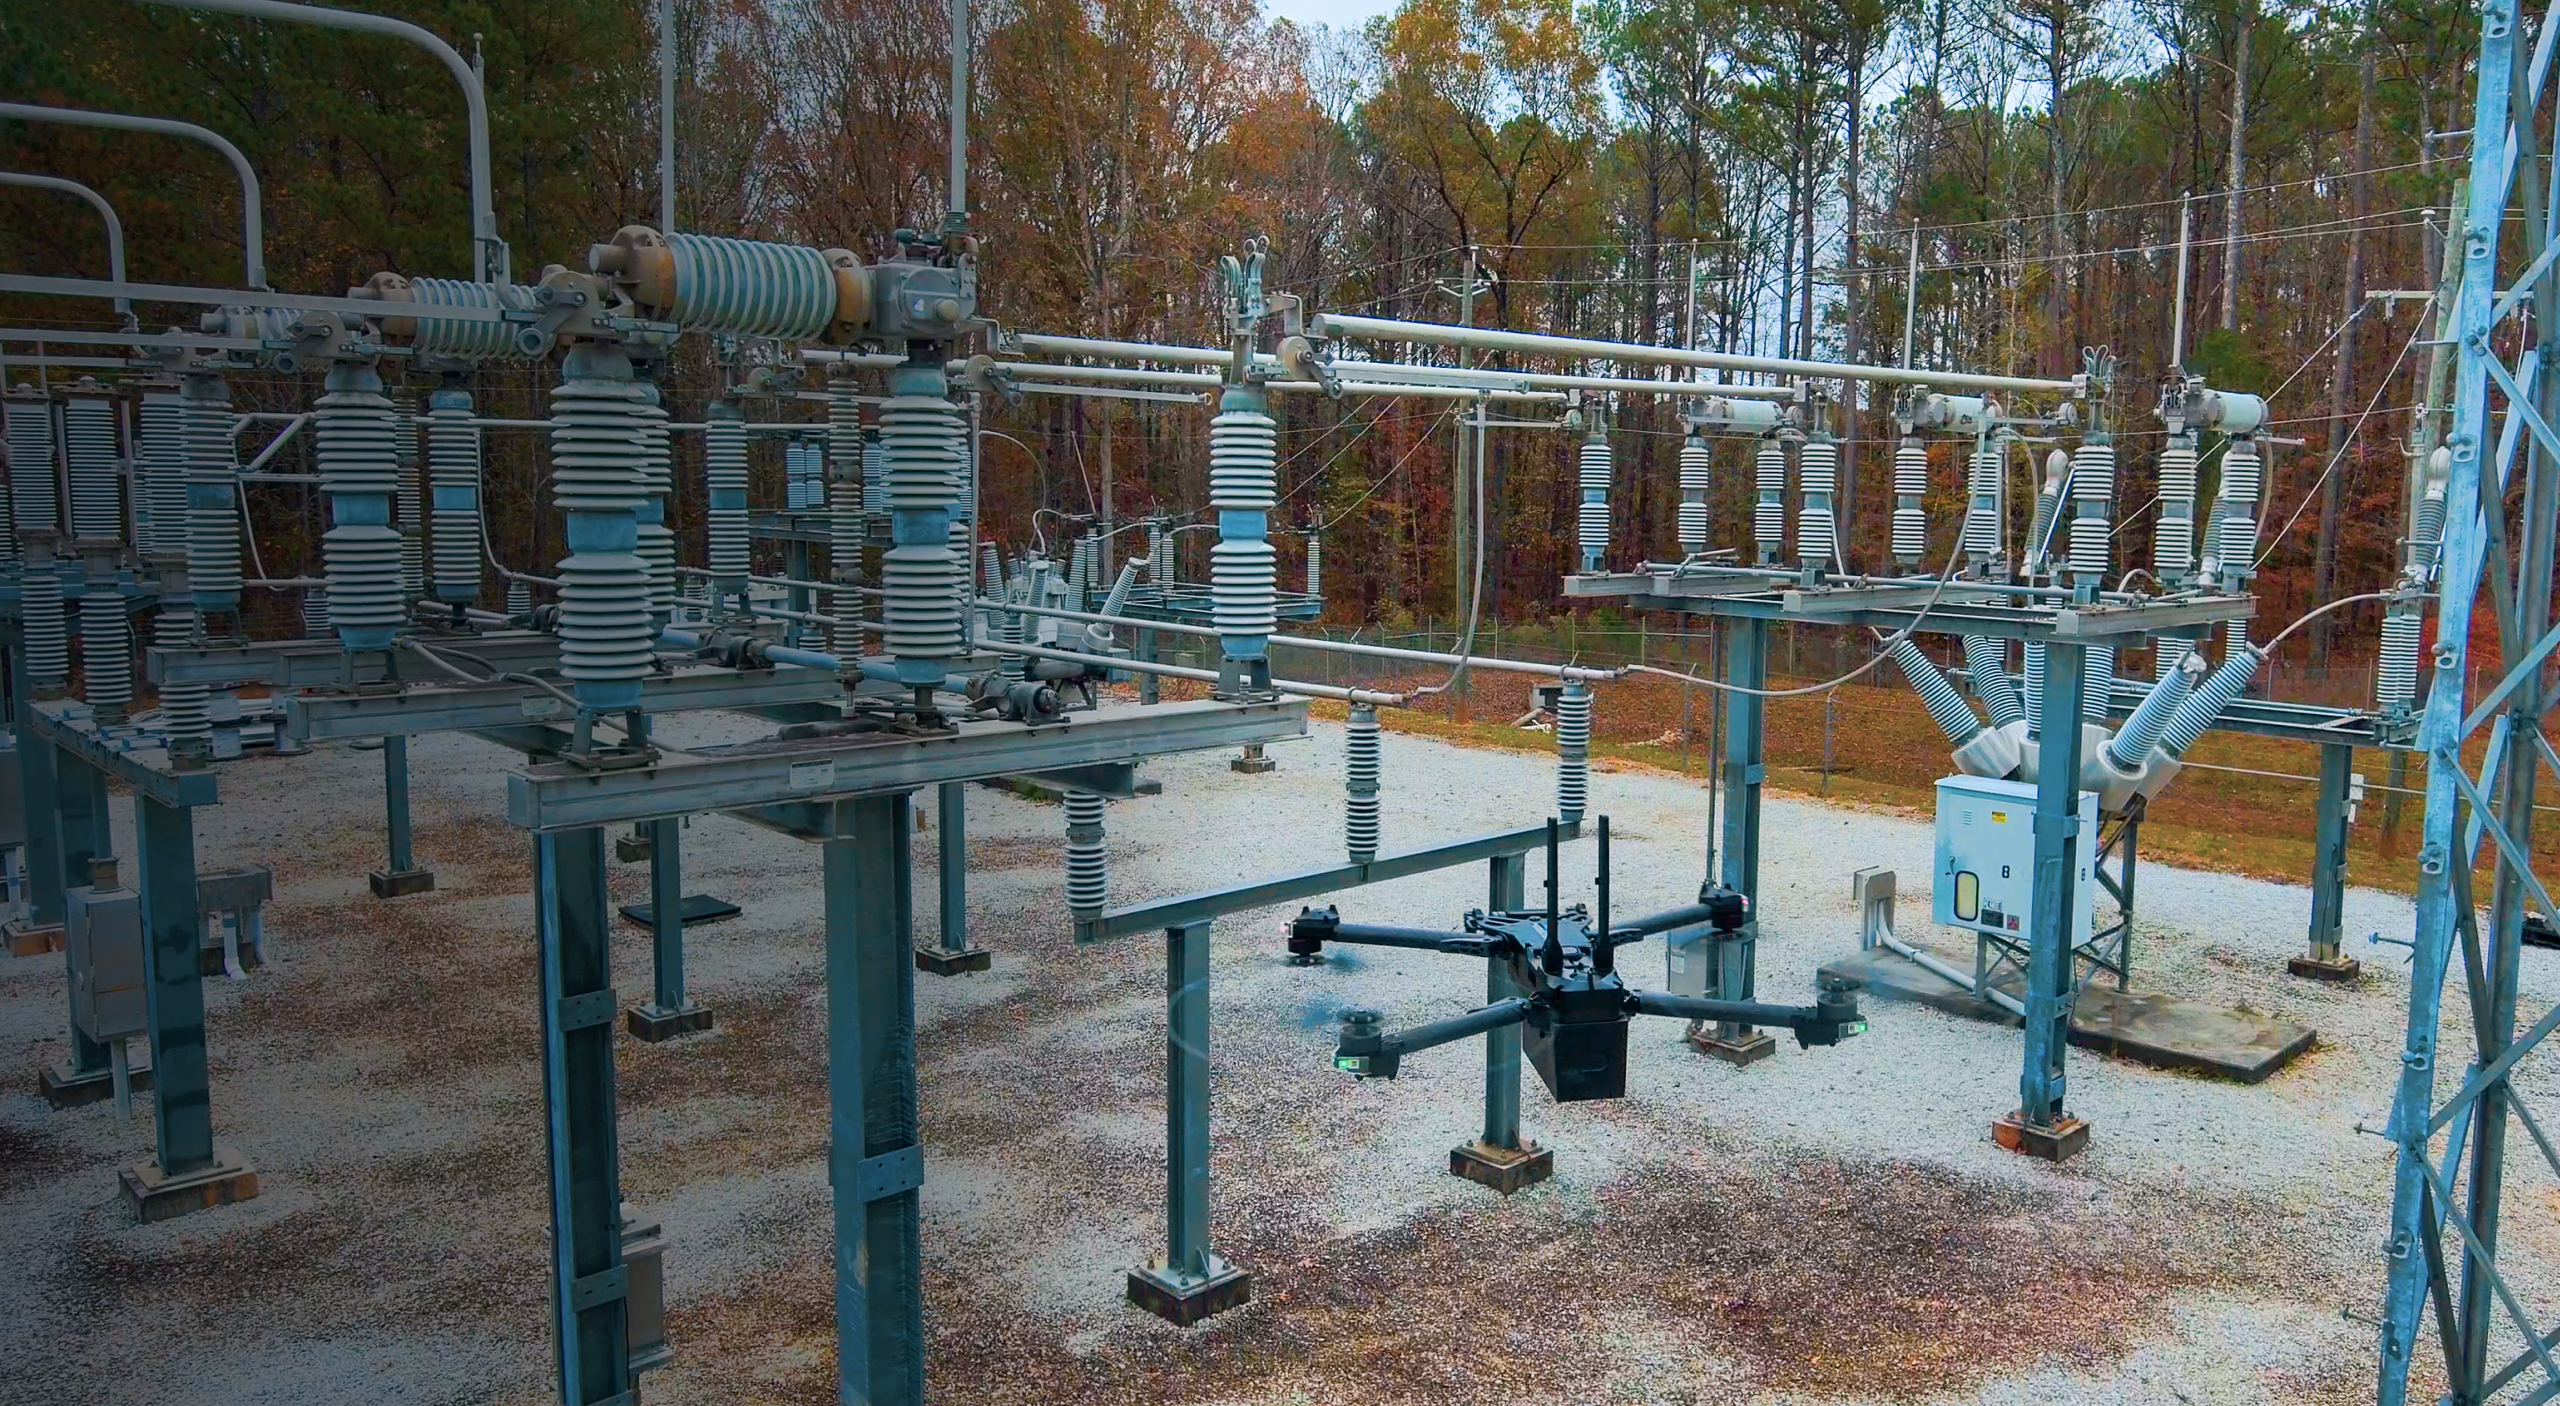 Wide view of a Skydio drone flying in a electrical power substation location